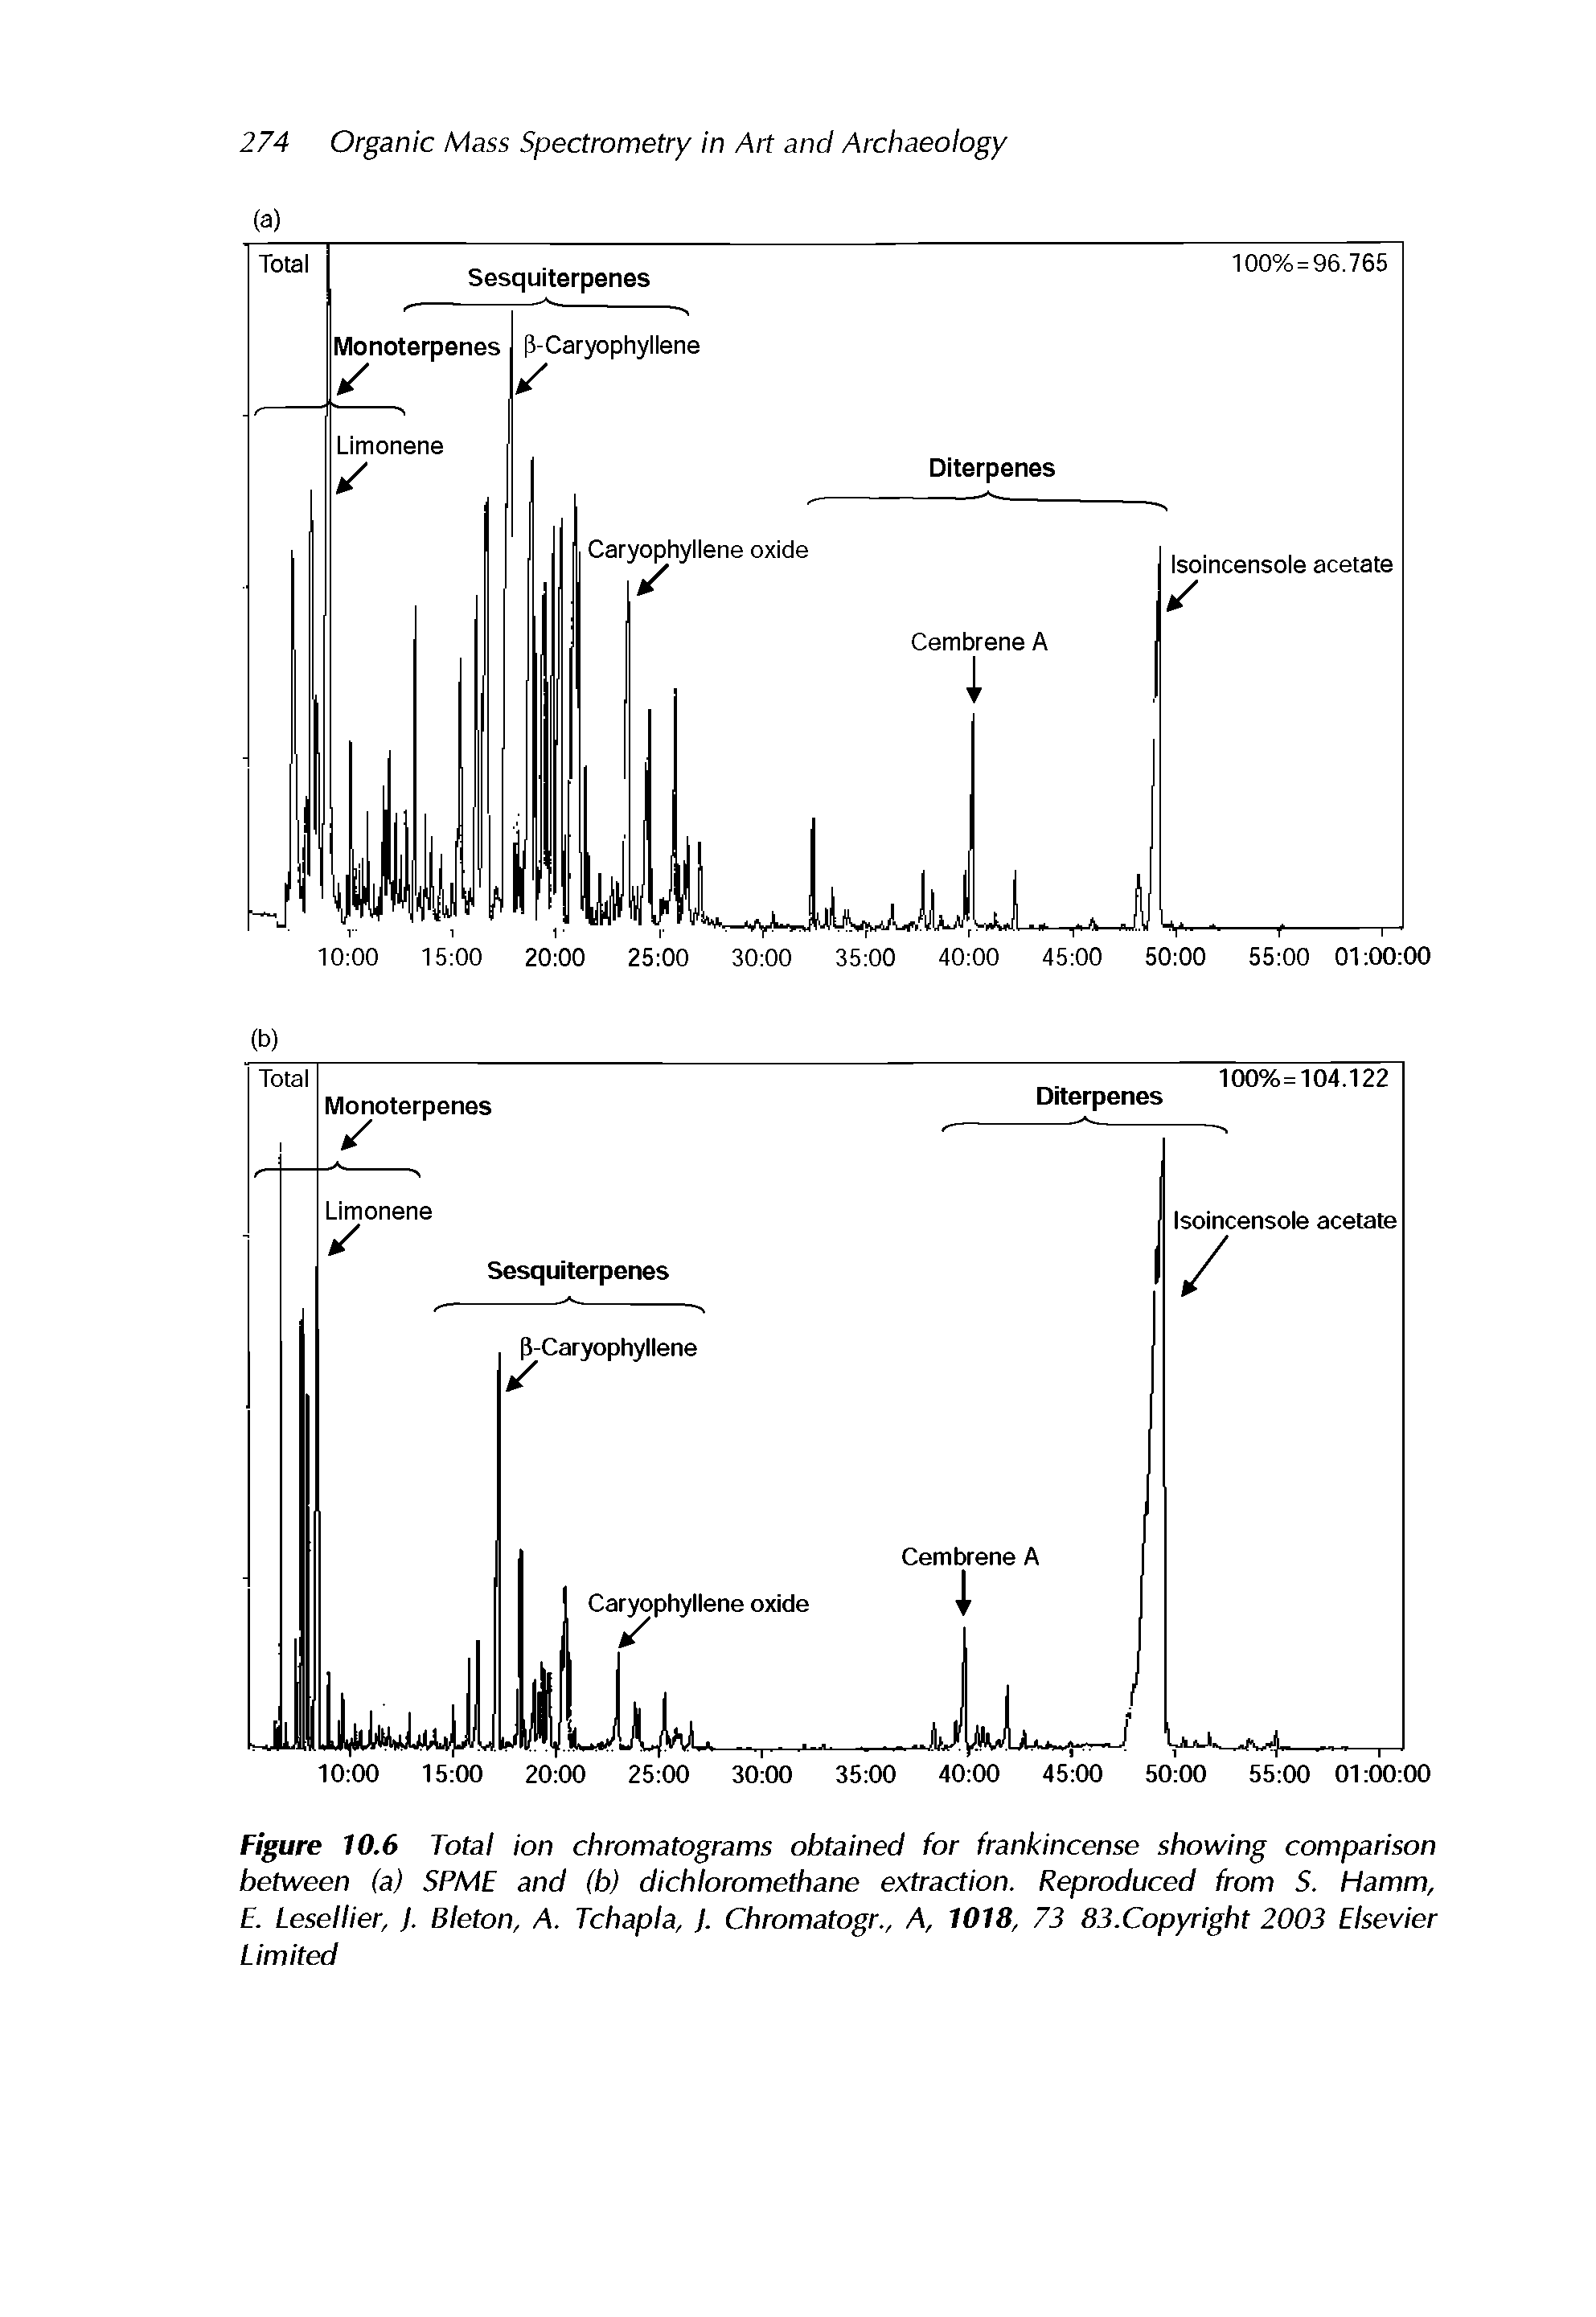 Figure 10.6 Total ion chromatograms obtained for frankincense showing comparison between (a) SPME and (b) dichloromethane extraction. Reproduced from S. Hamm, E. Lesellier, j. Bleton, A. Tchapla, J. Chromatogr., A, 1018, 73 83.Copyright 2003 Elsevier Limited...